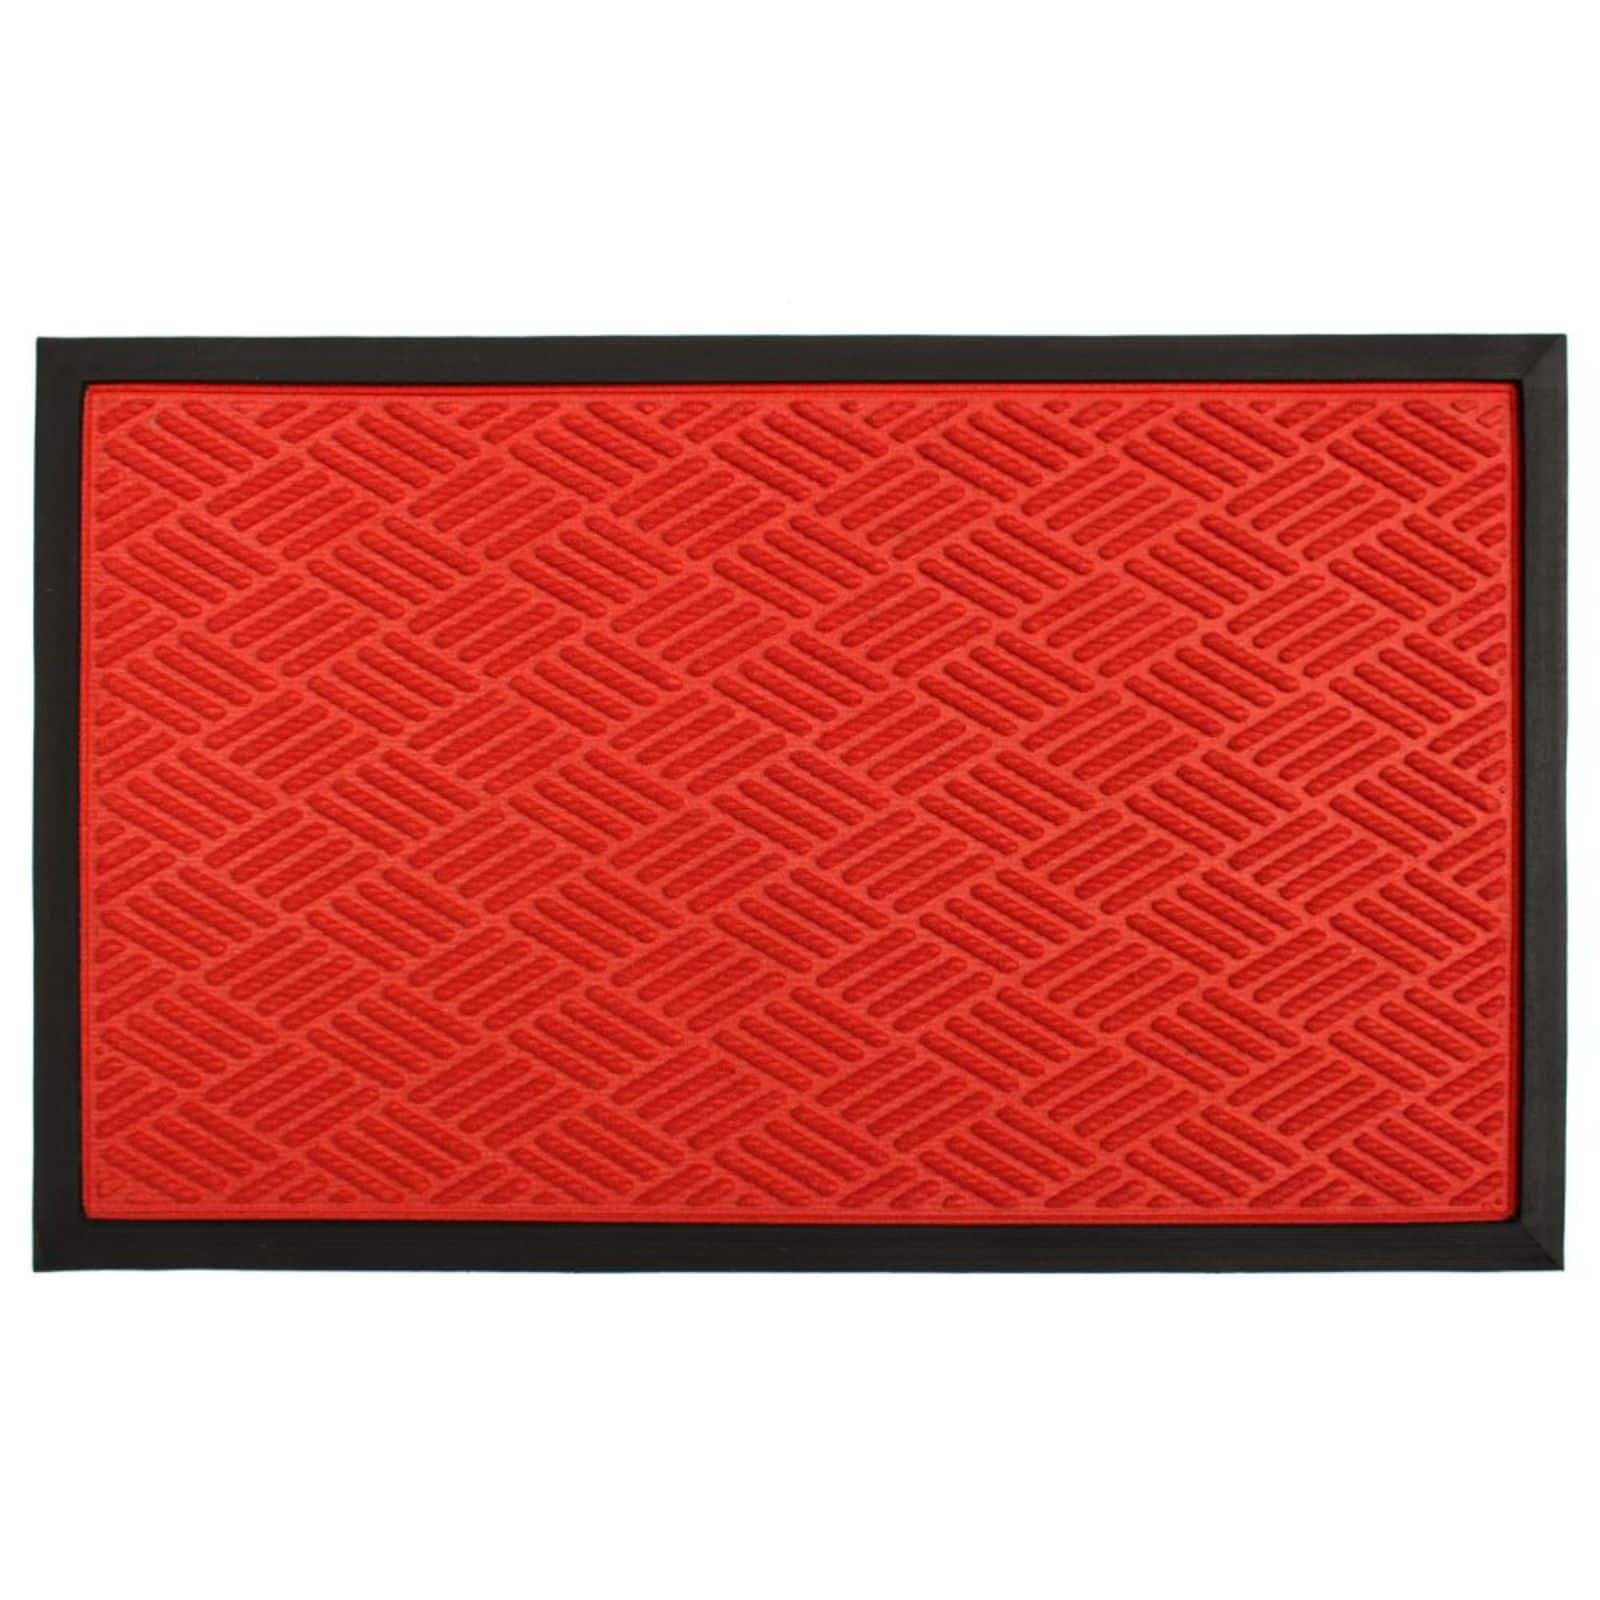 RugSmith Red Molded Orange Rubber Poly Doormat